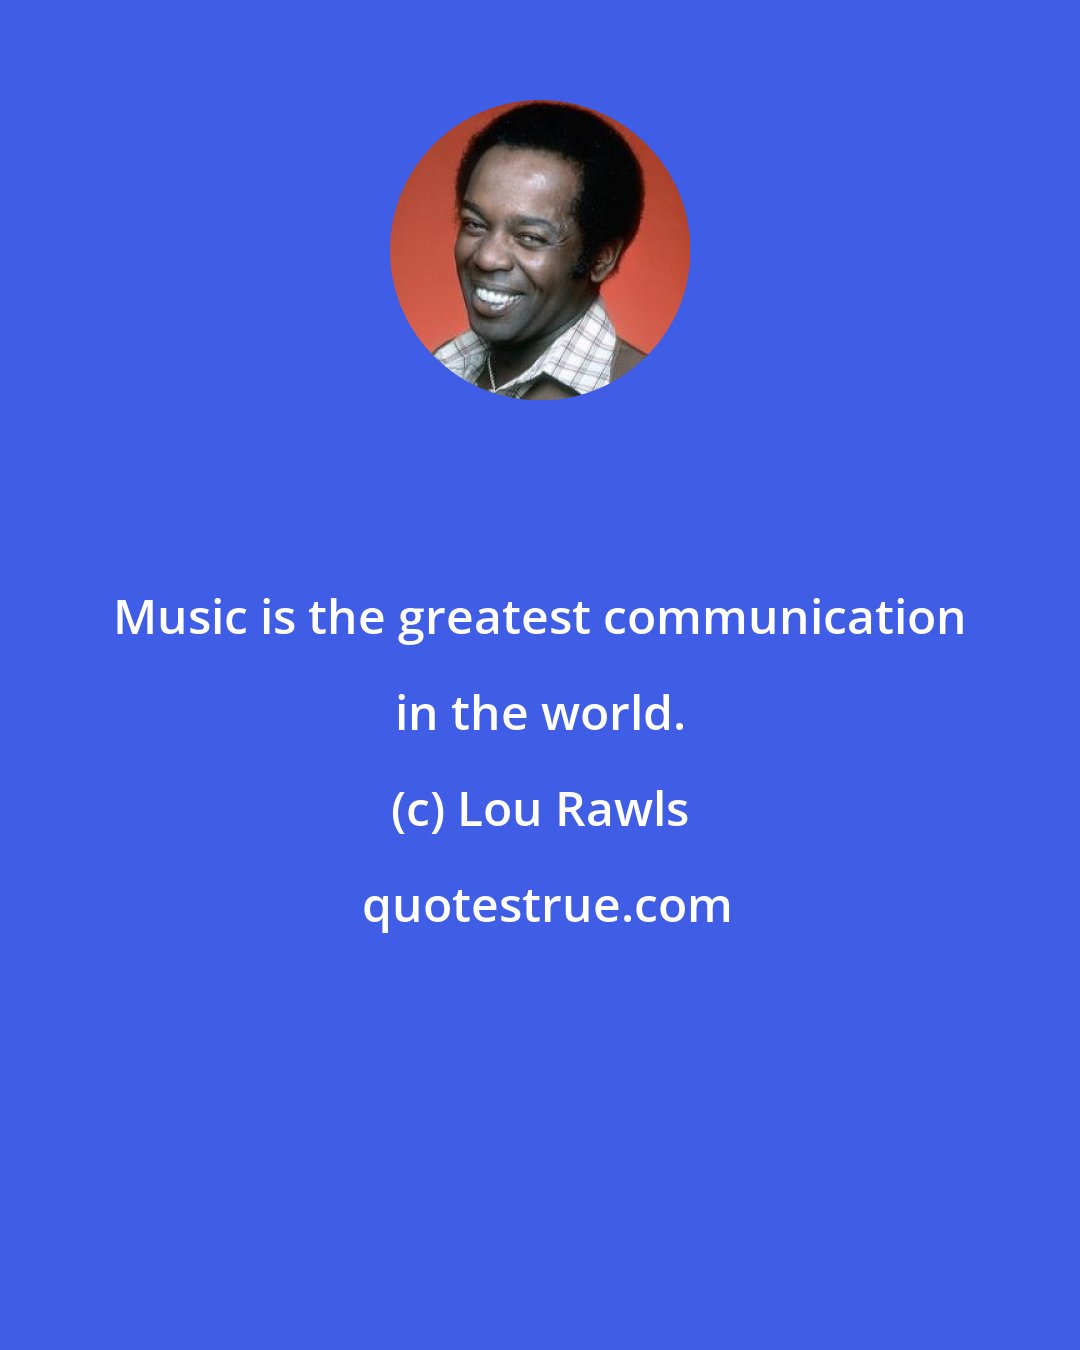 Lou Rawls: Music is the greatest communication in the world.